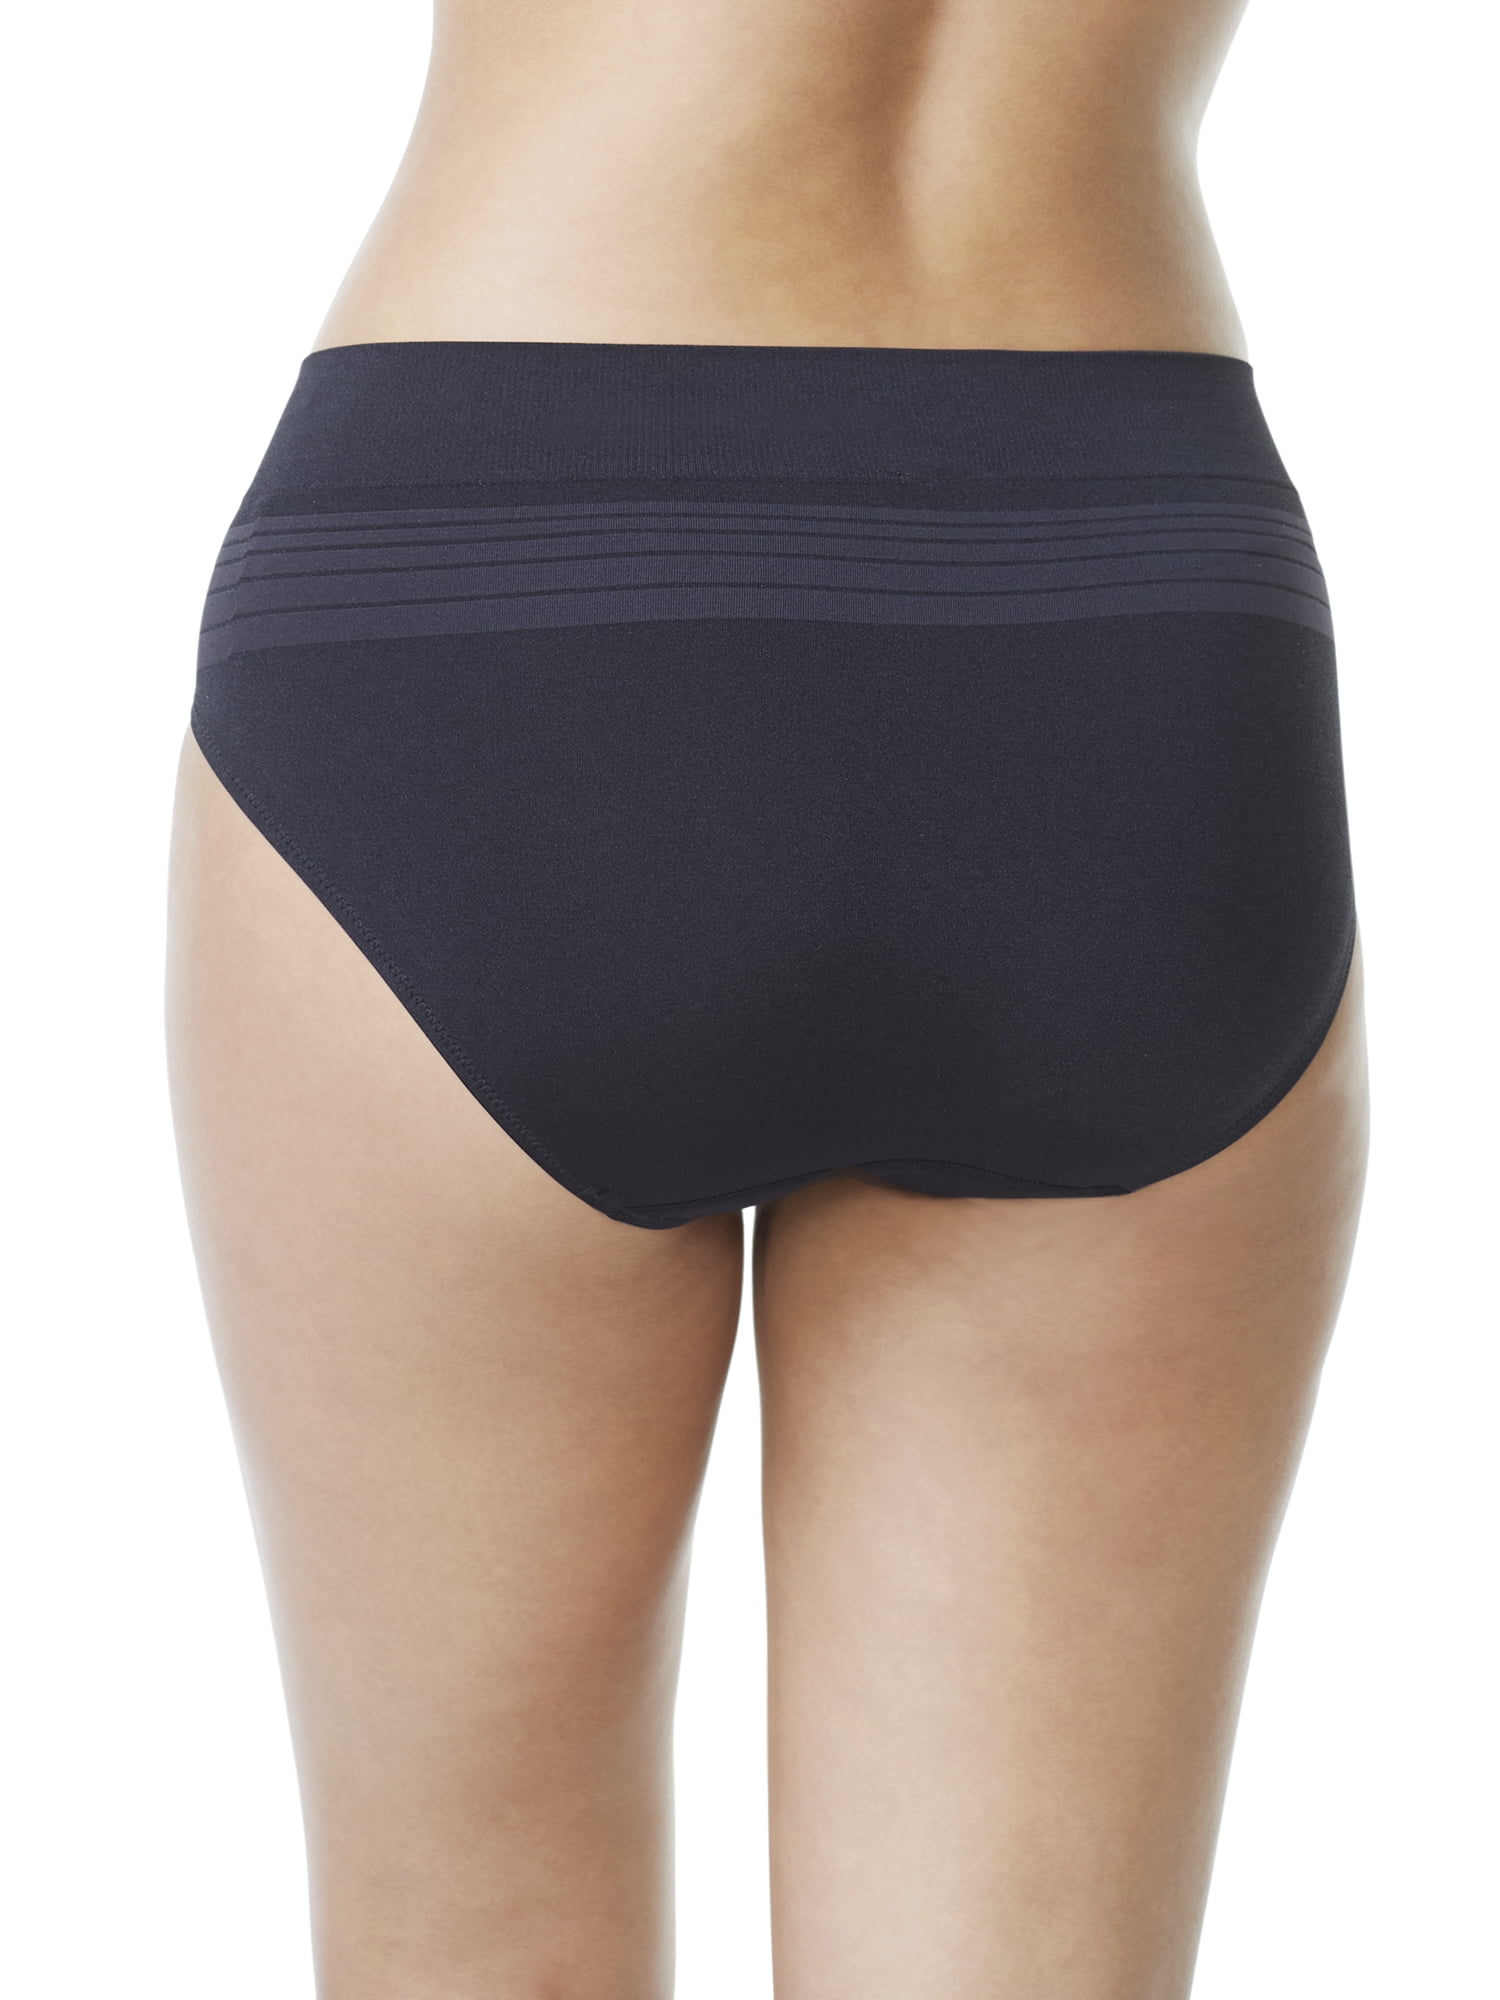 Warners Blissful Benefits Dig-Free Seamless Hipster 3-Pack RU7323W 